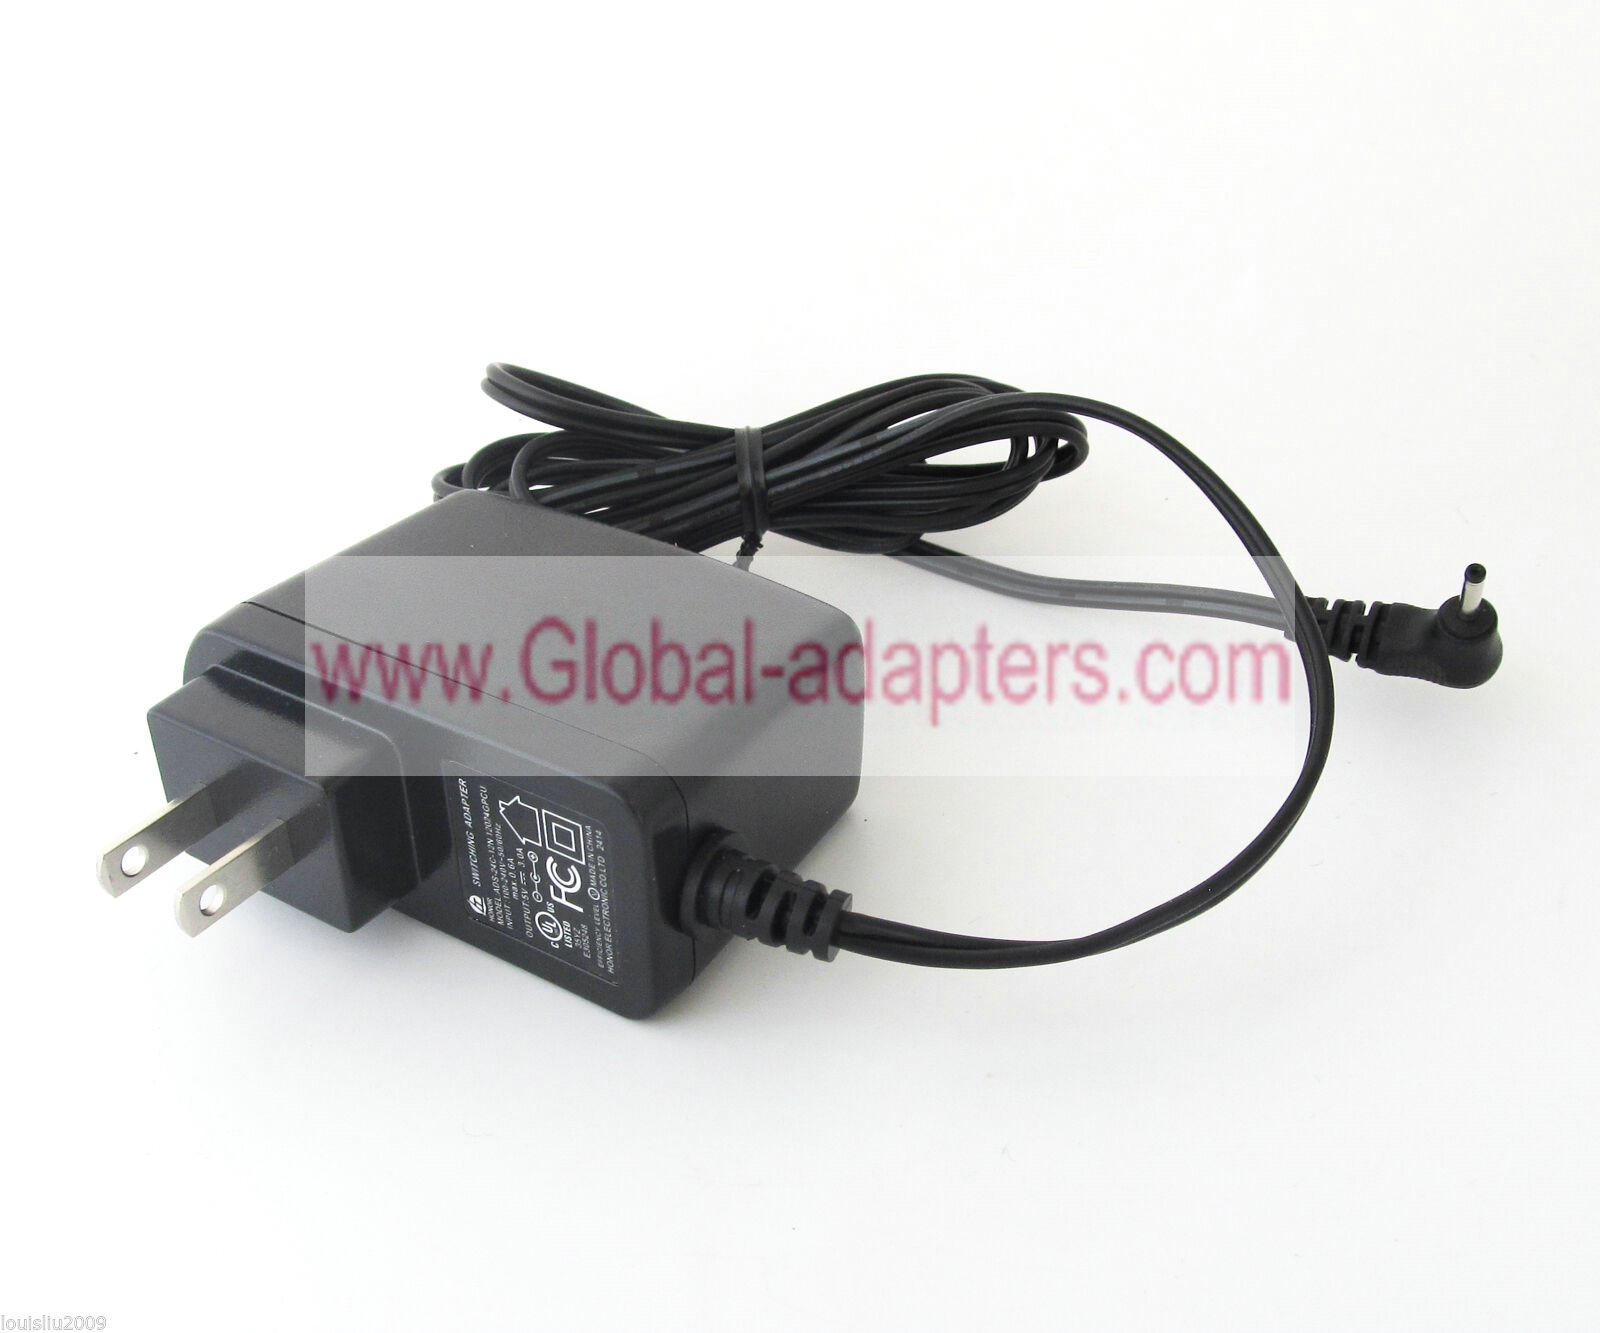 New 5V 3.0A HONOR ADS-24C-12N 120224GPCU SWITCHING AC/DC power adapter